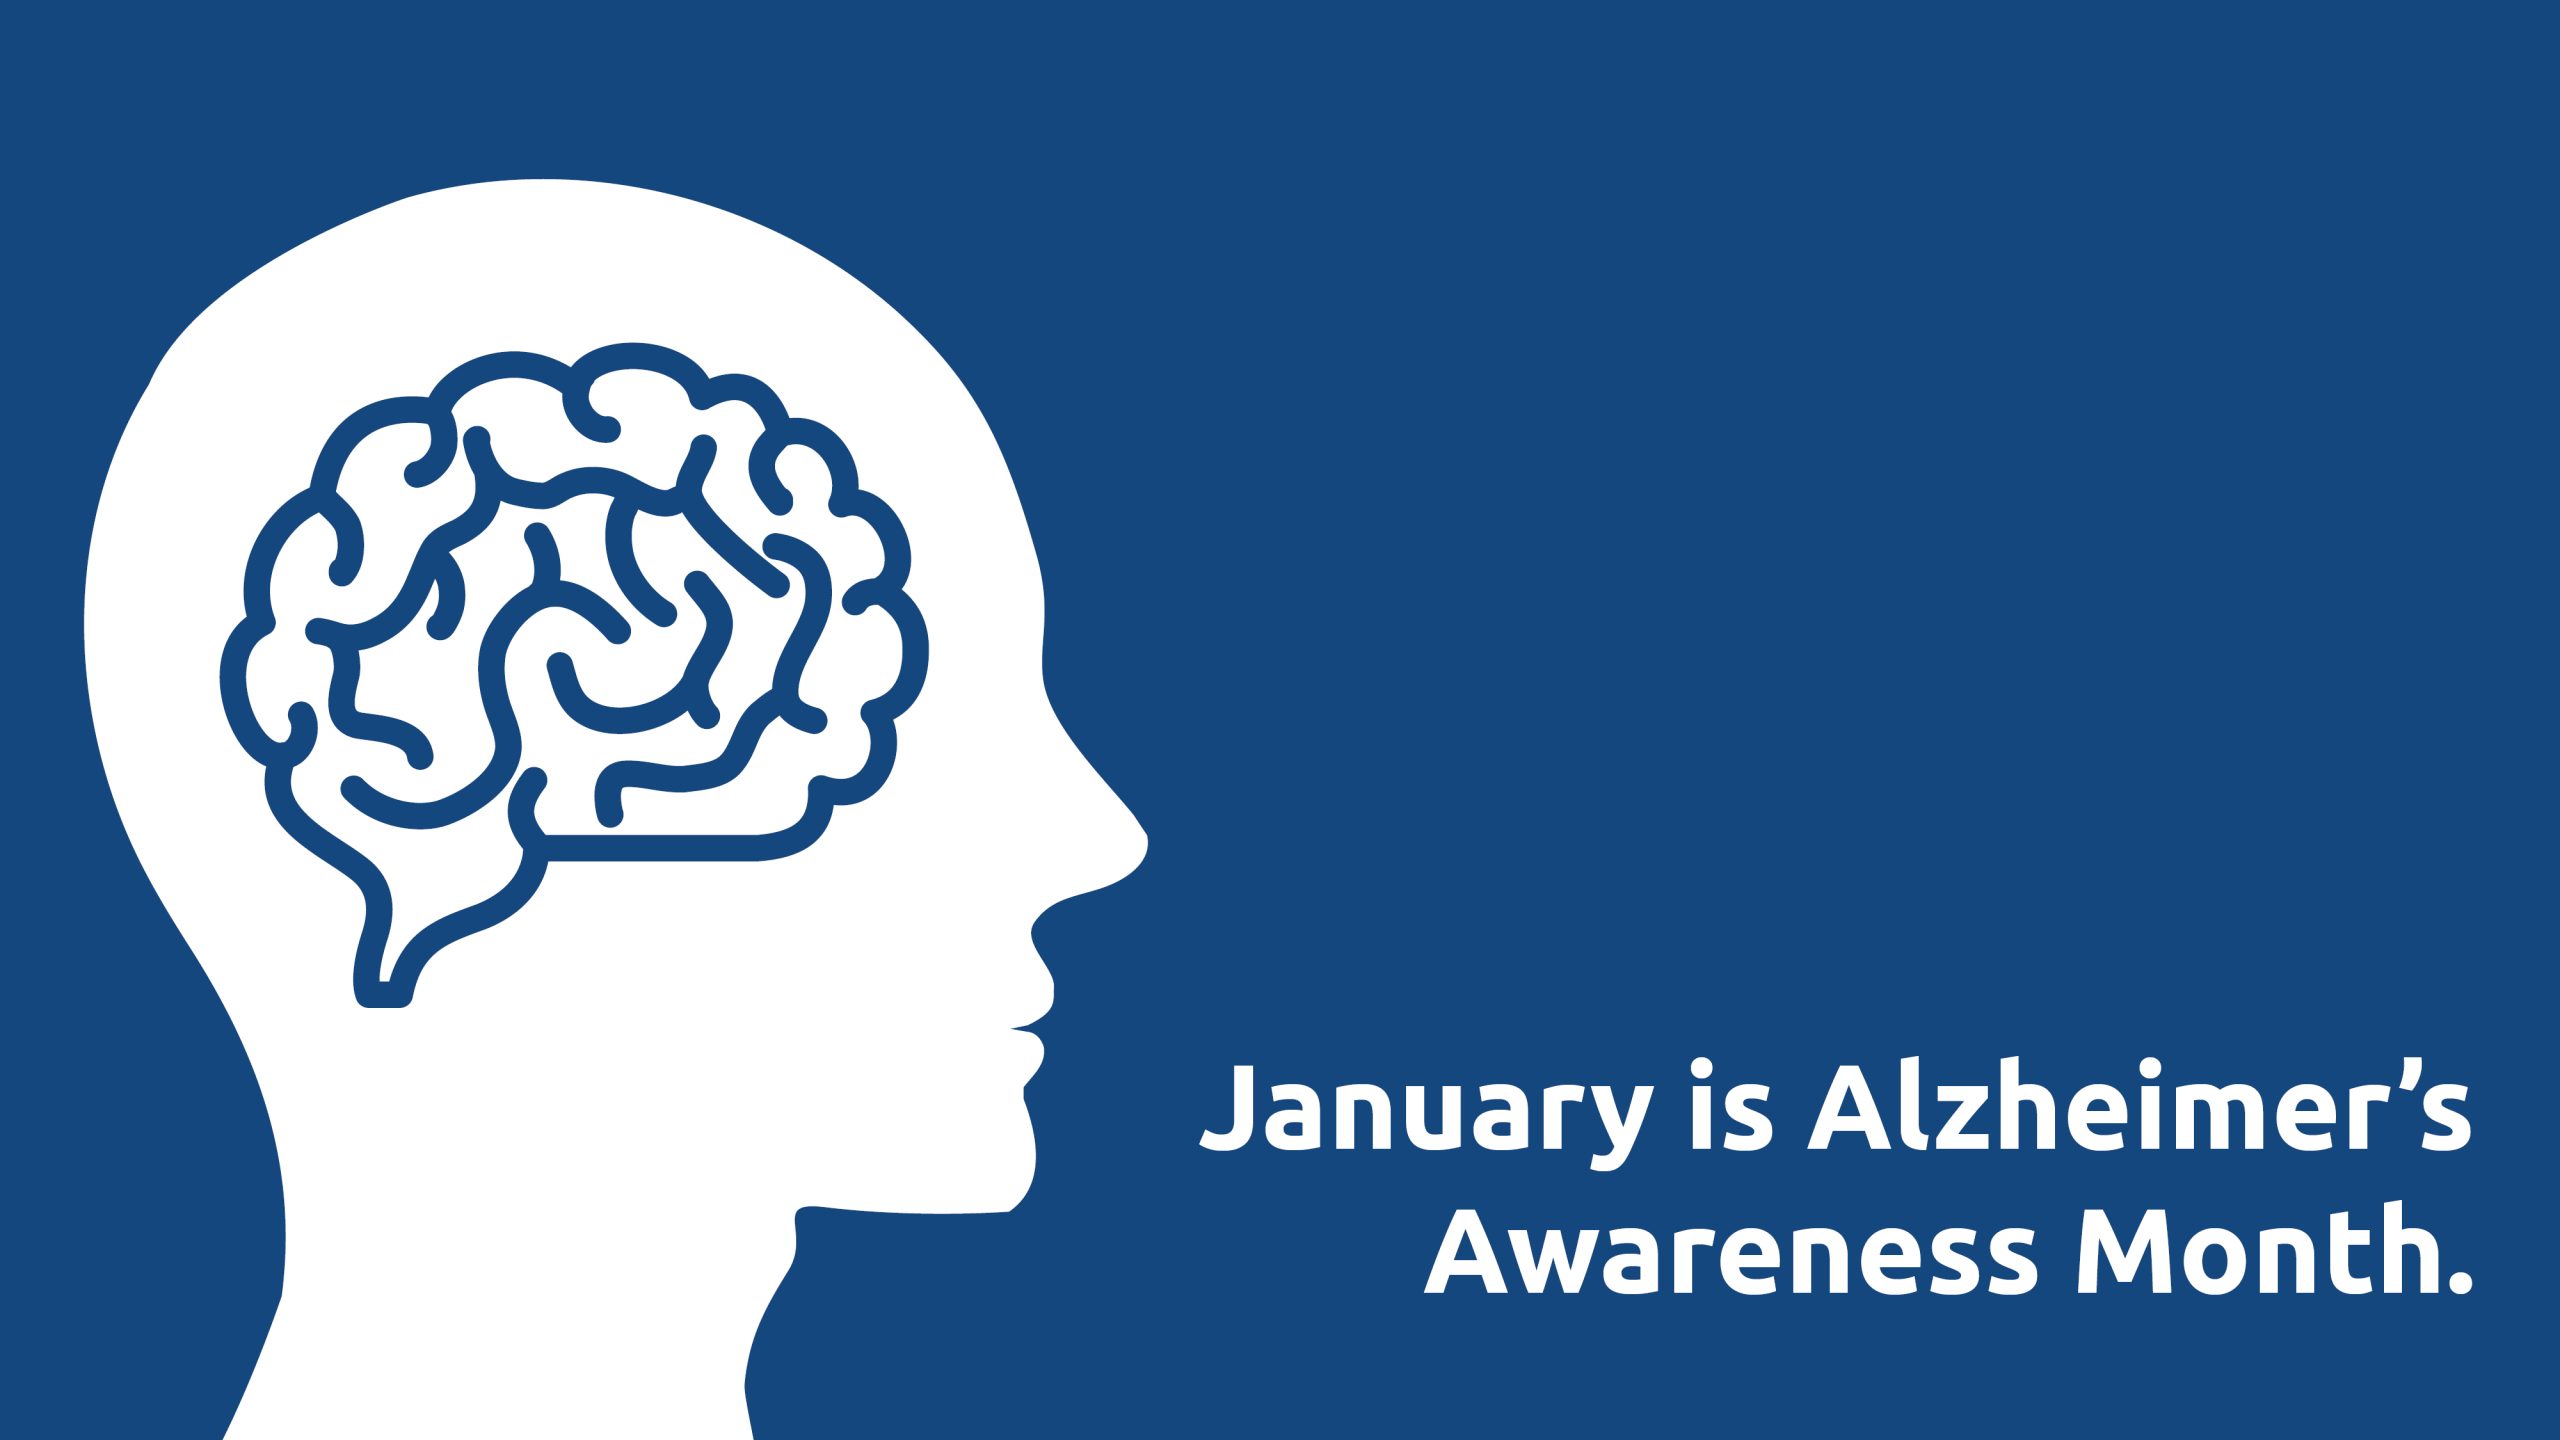 Illustration of a human head and brain with text promoting Alzheimer's Awareness Month